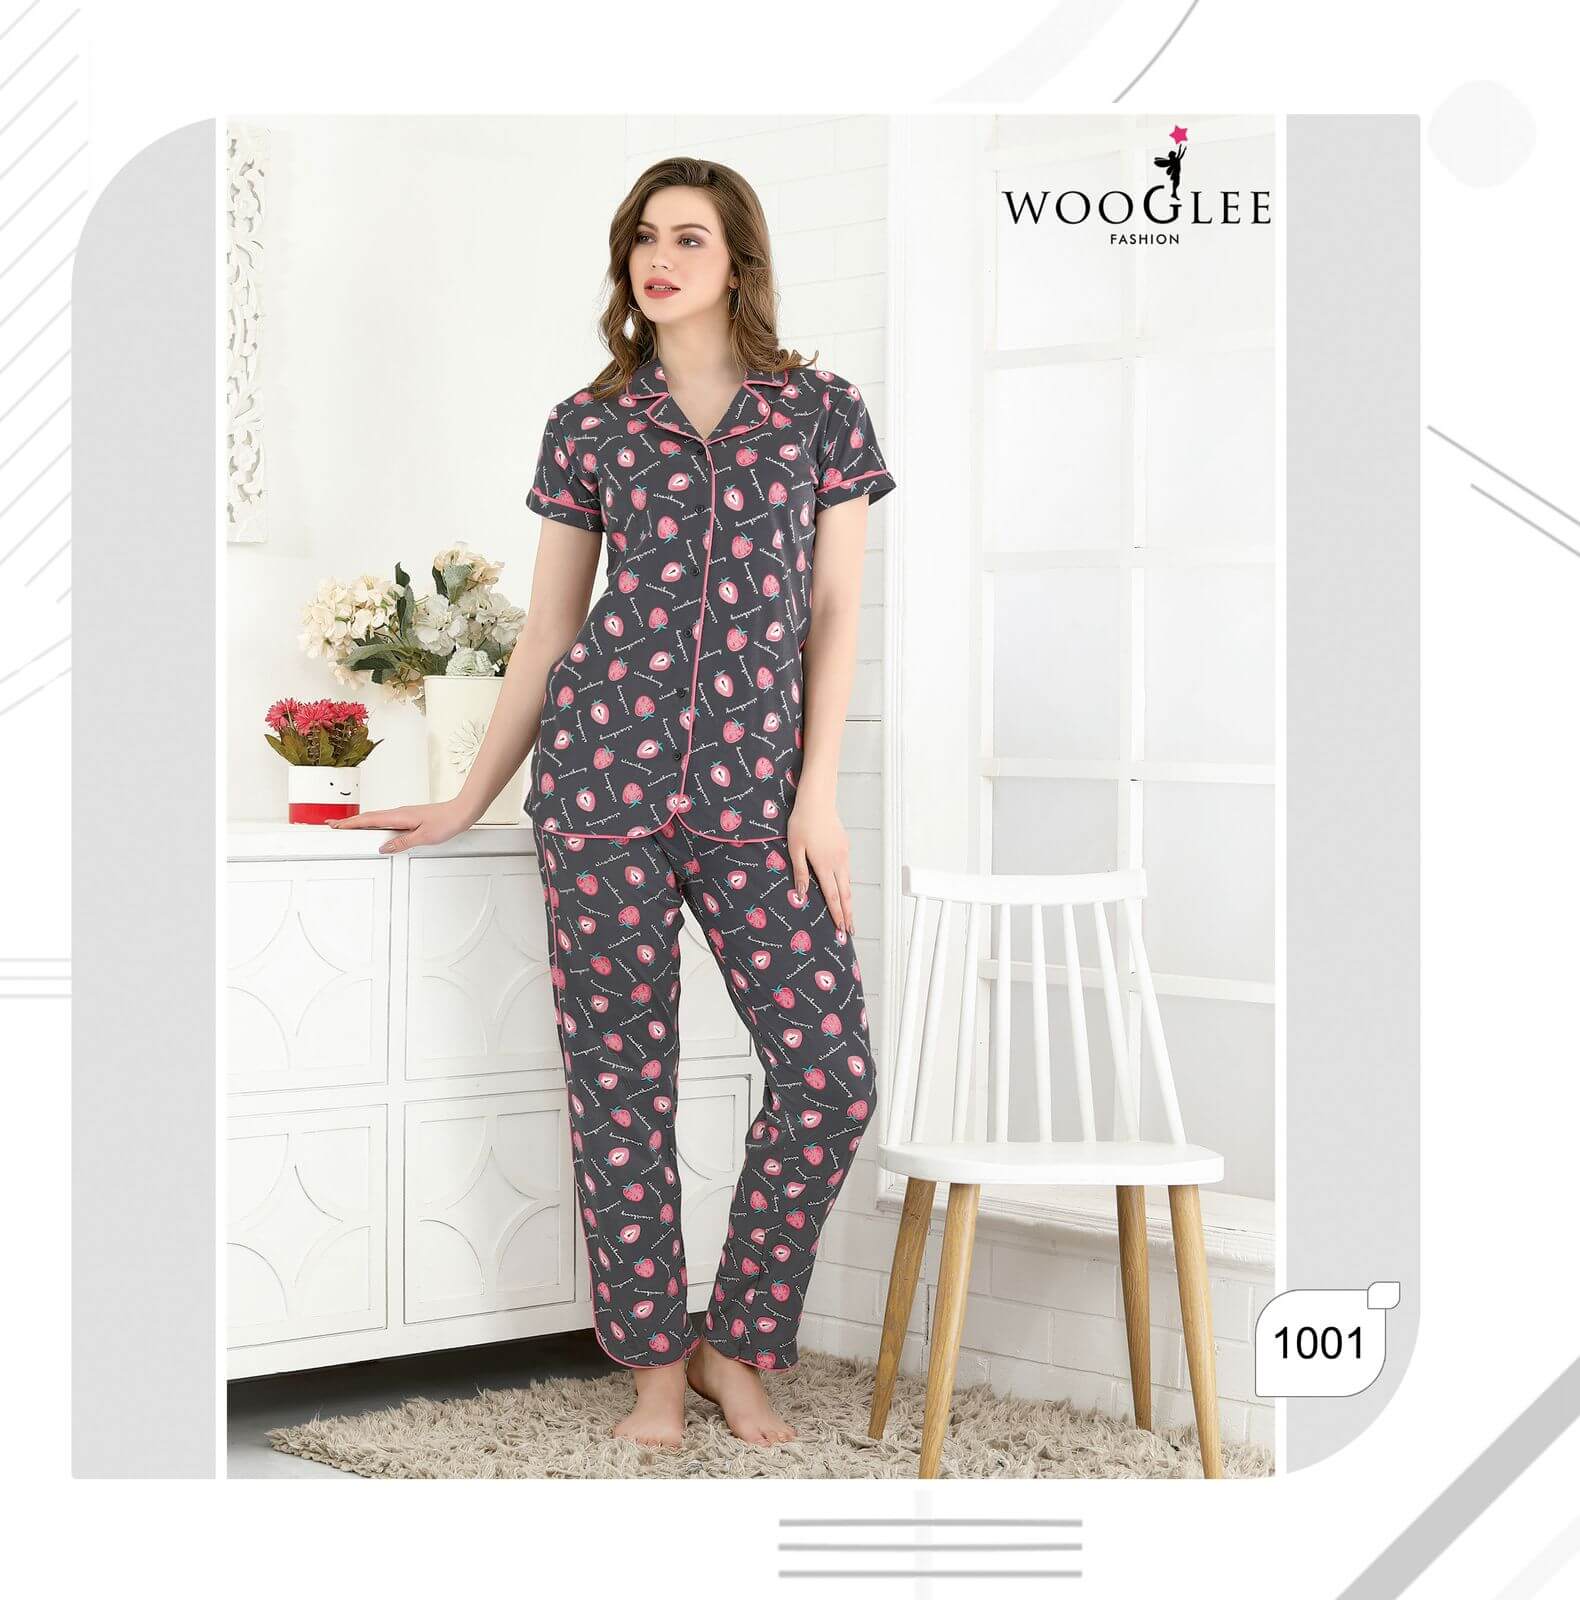 Wooglee Fashion Night Out vol 3 Night Dress Catalog collection 1